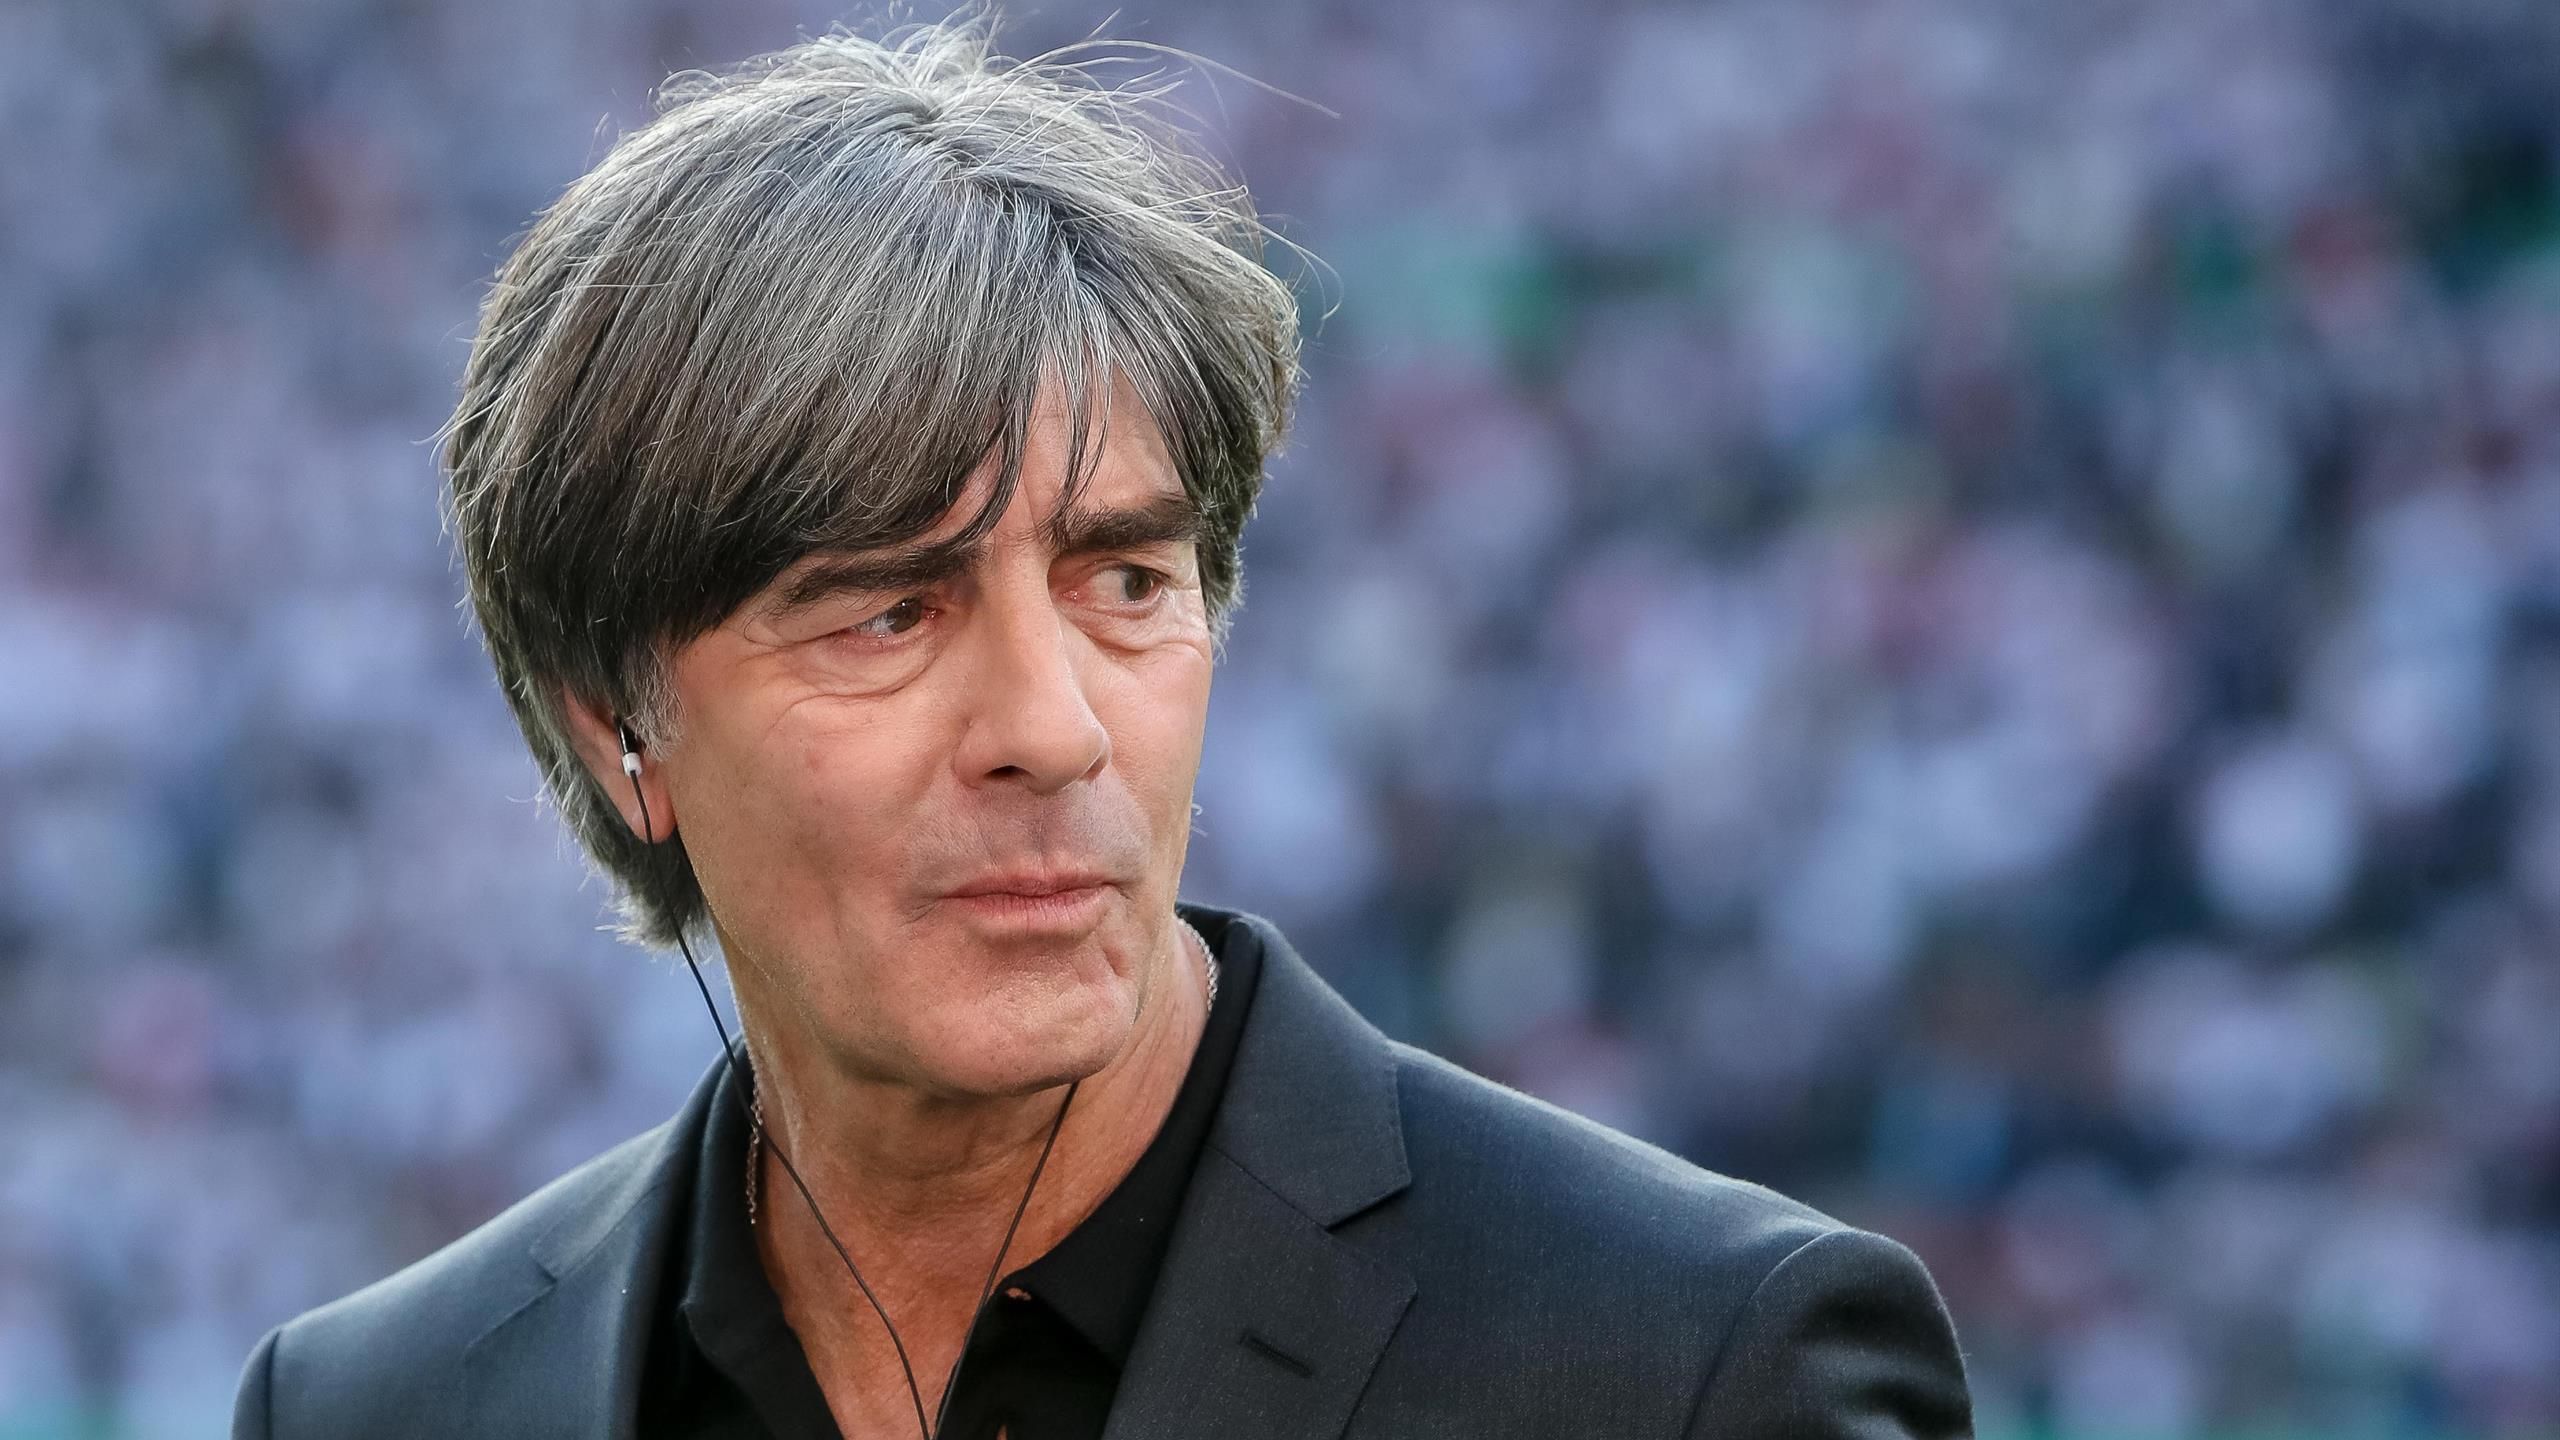 Joachim Low in discussion about appointing Türkiye national team coach to succeed Stefan Kuntz?